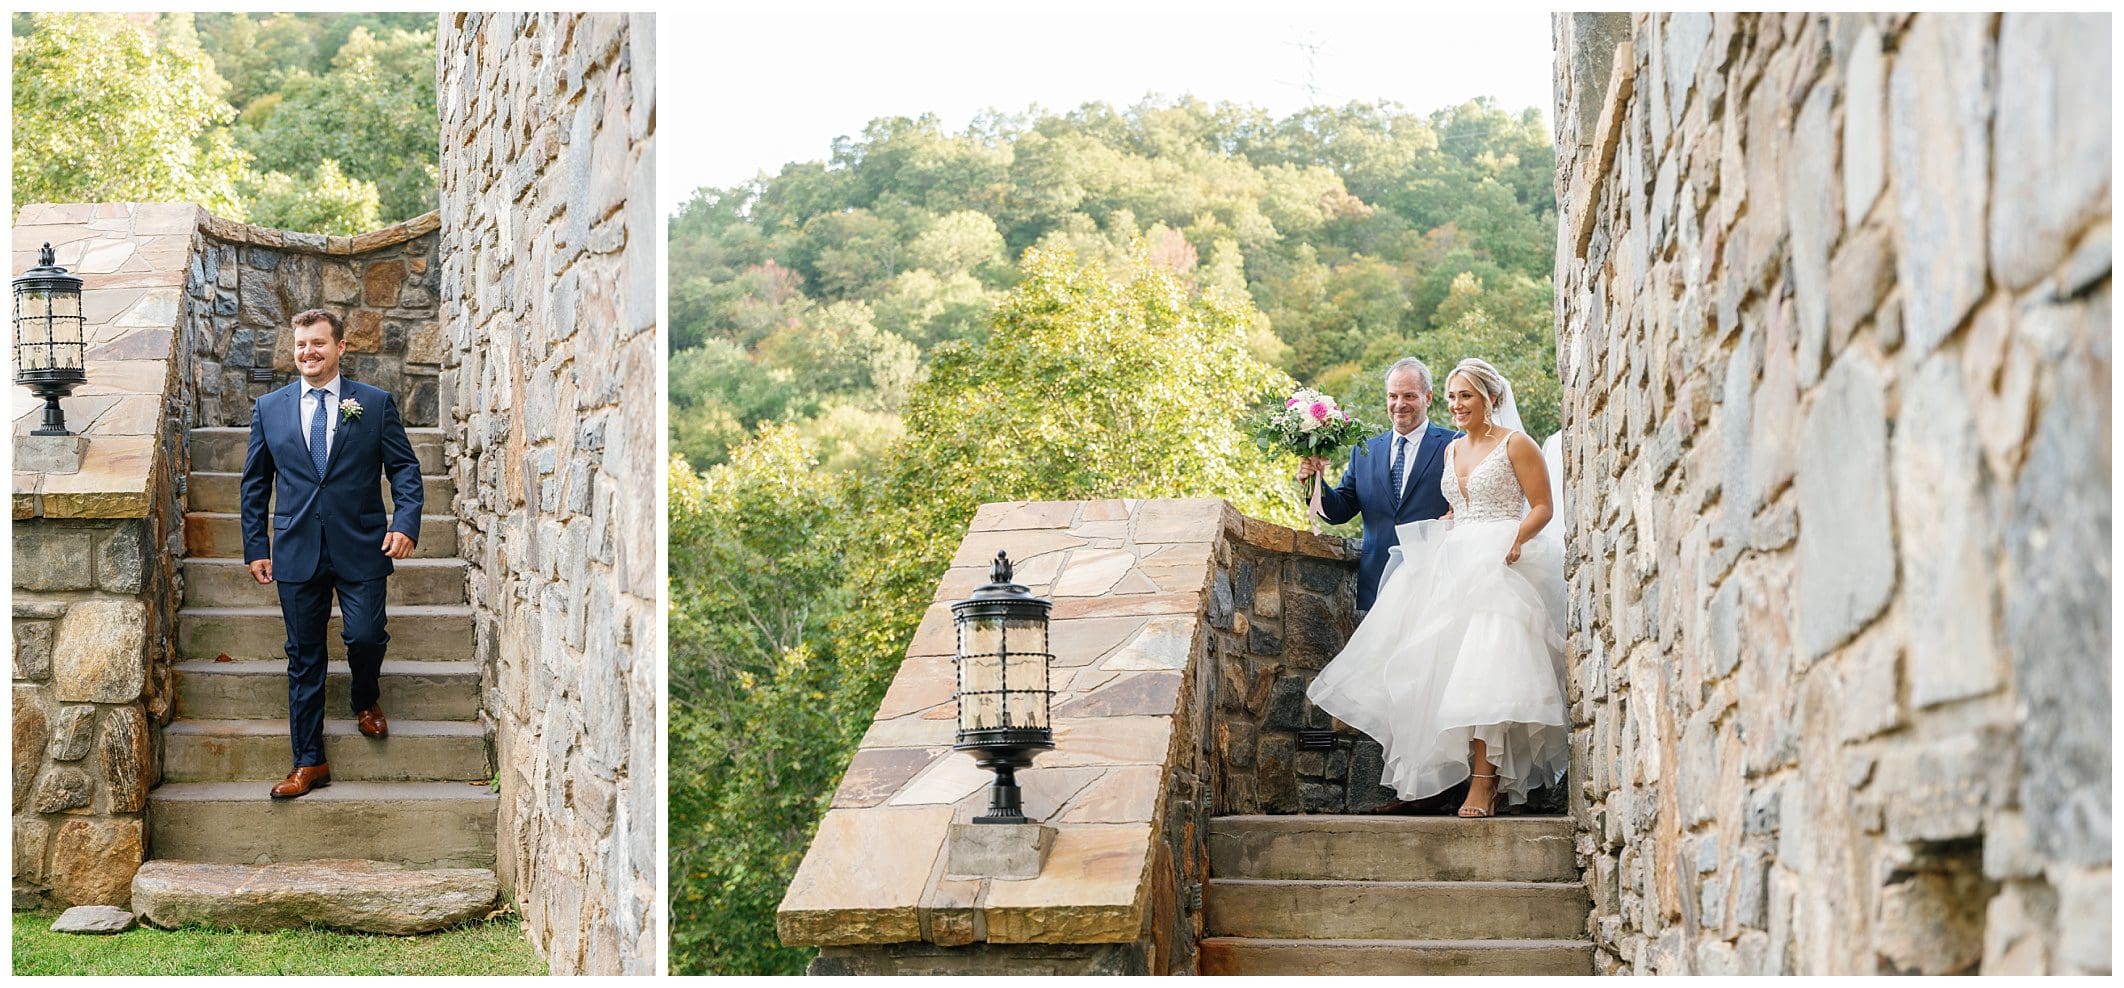 A bride and groom standing on the steps of a stone building.